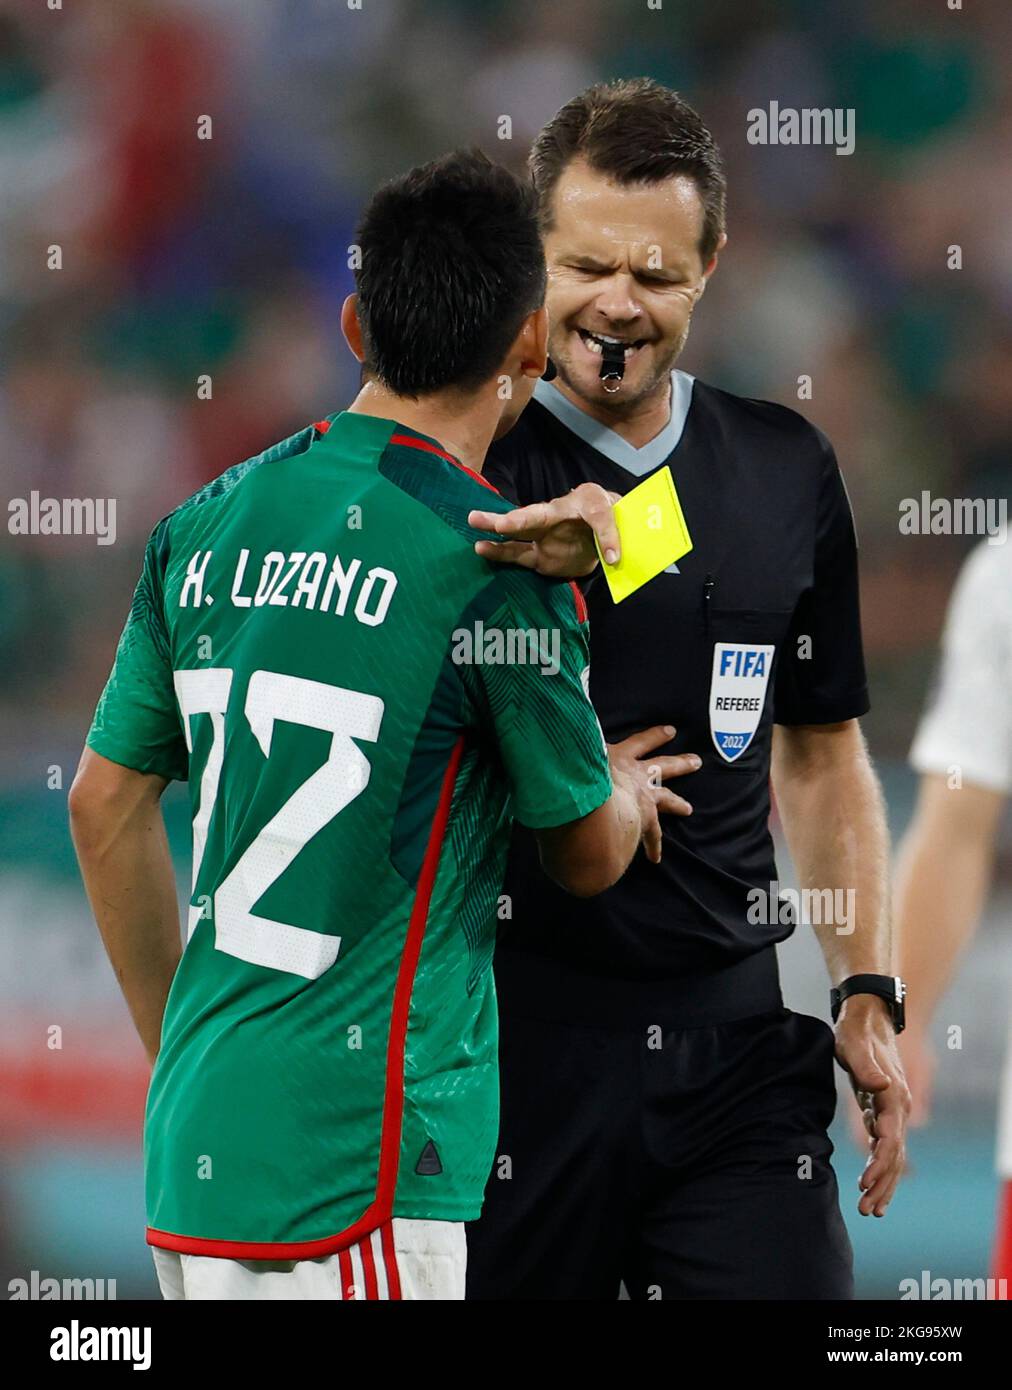 Doha, Qatar. 22nd Nov, 2022. Hirving Lozano (L) of Mexico argues with the referee during the Group C match between Mexico and Poland of the 2022 FIFA World Cup at Ras Abu Aboud (974) Stadium in Doha, Qatar, Nov. 22, 2022. Credit: Wang Lili/Xinhua/Alamy Live News Stock Photo